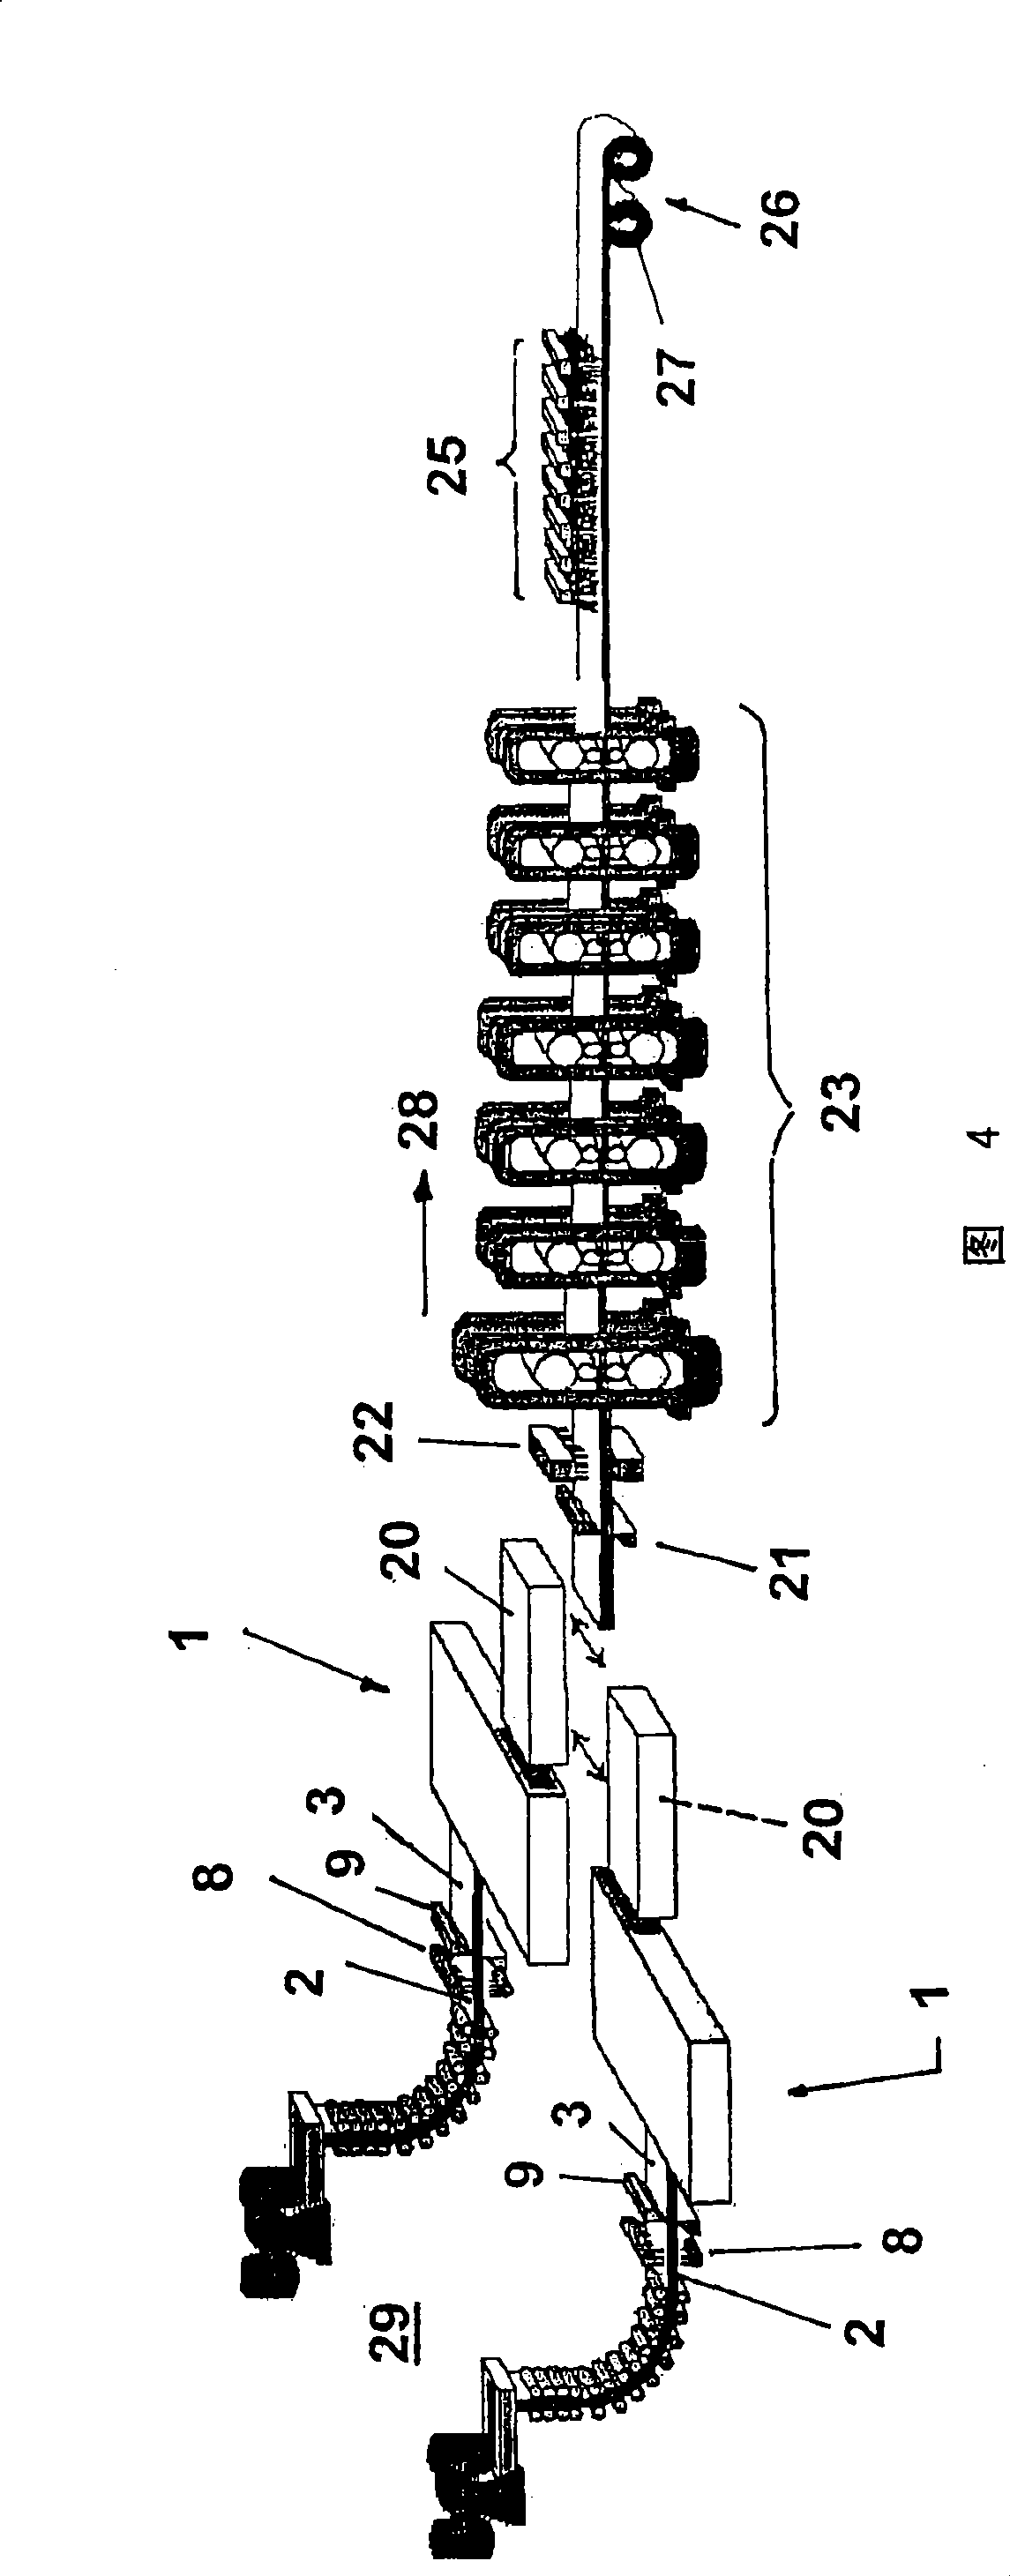 Roller hearth furnace for heating and/or temperature equalisation of steel or steel alloy continuous cast products and arrangement thereof before a hot strip final rolling mill